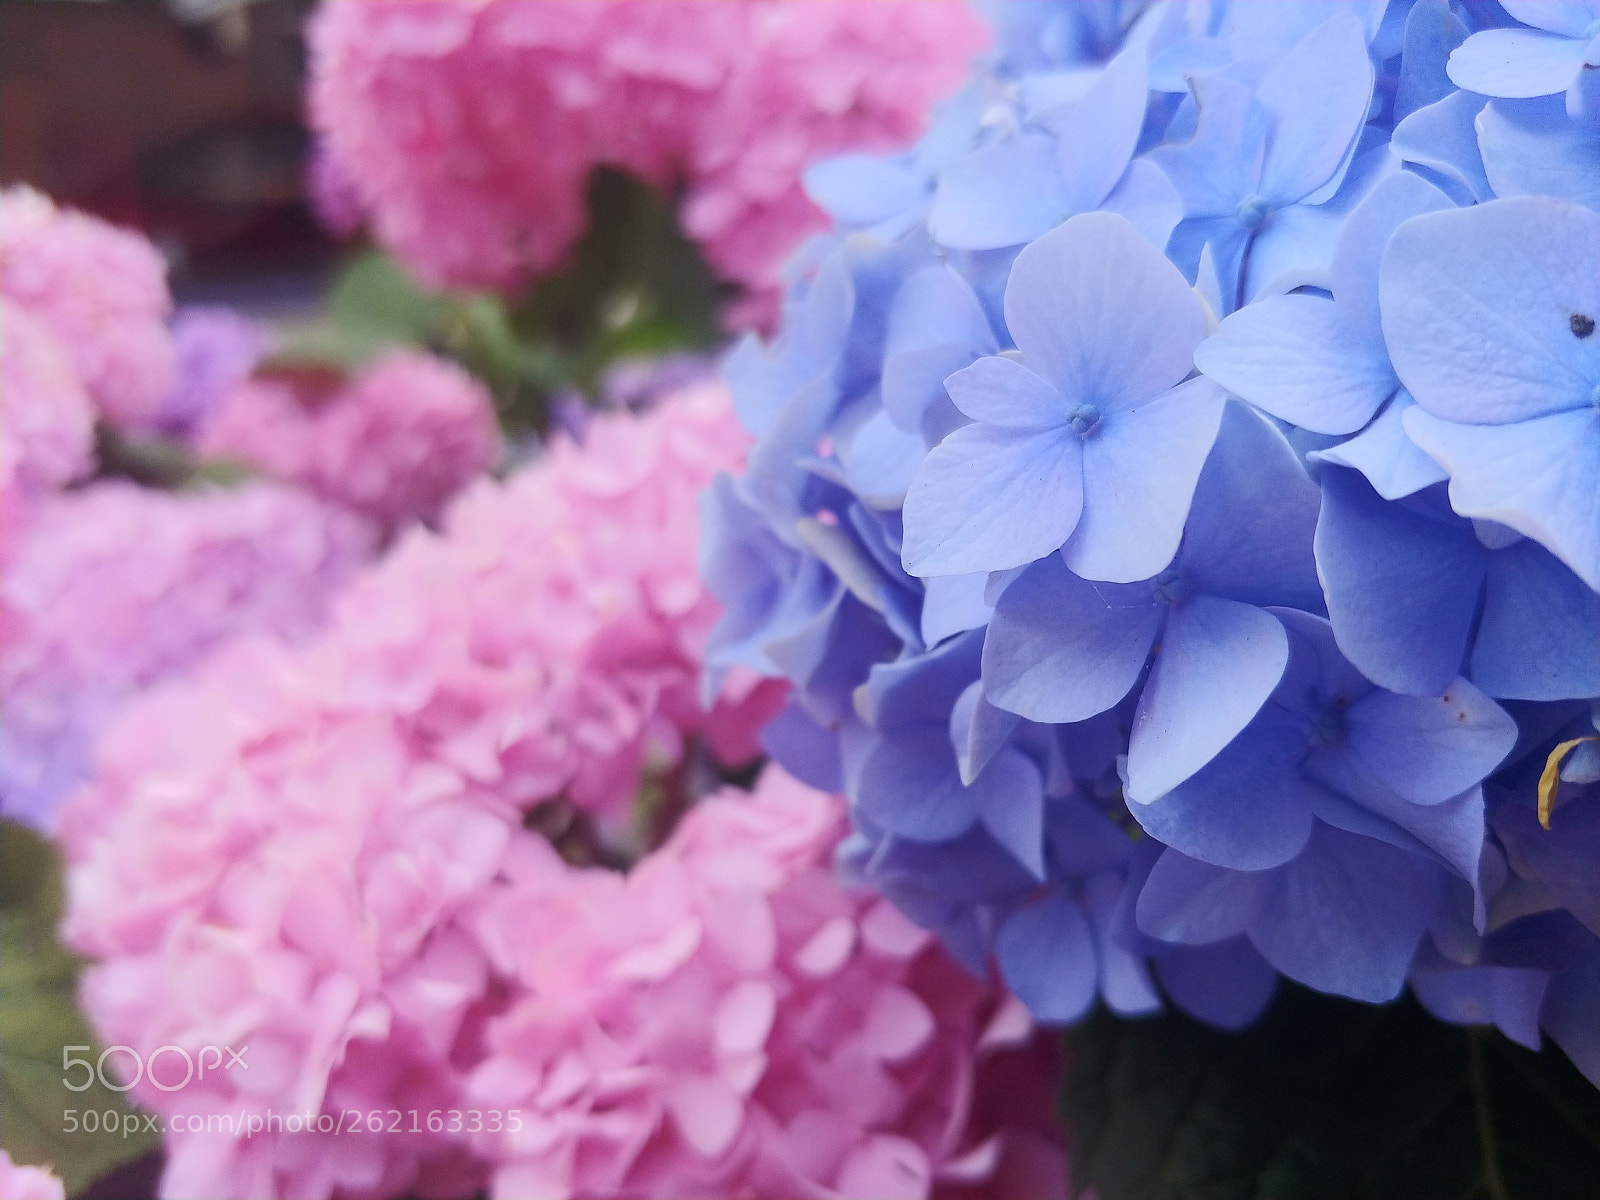 LG V30 sample photo. Blue and pink photography